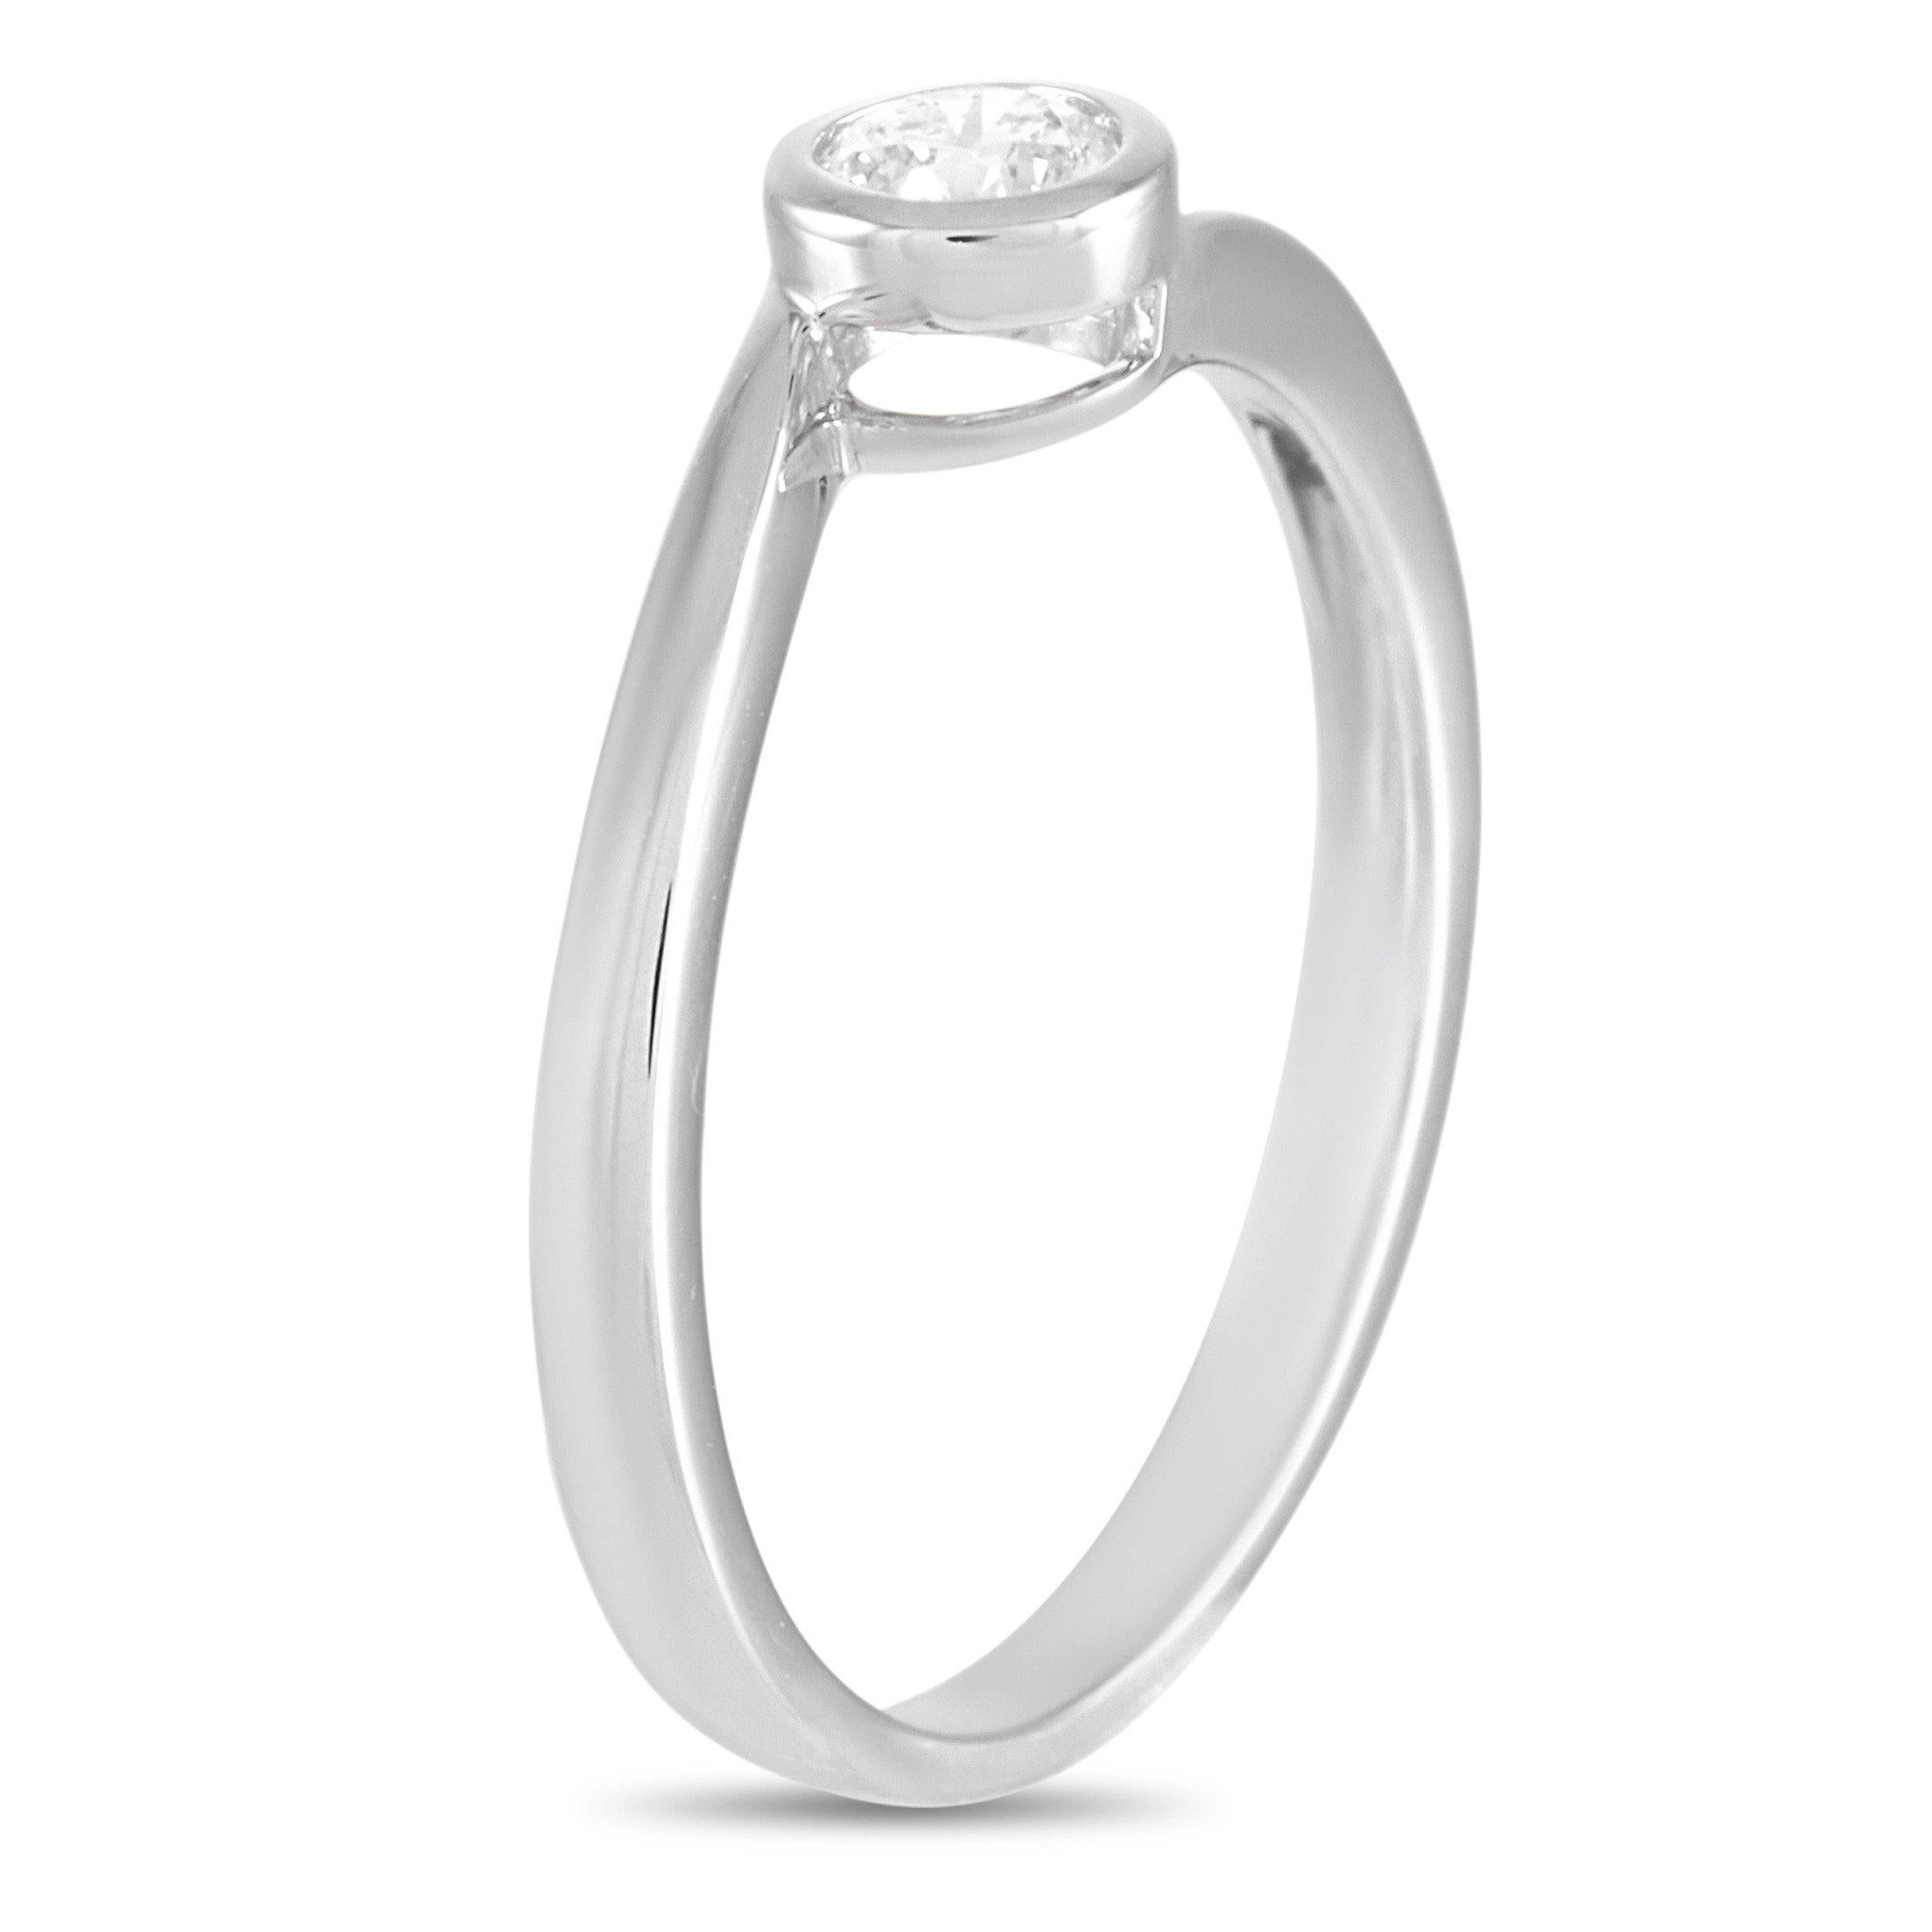 This LB Exclusive ring is crafted from 14K white gold and weighs 1.7 grams. It boasts band thickness of 2 mm and top height of 4 mm, while top dimensions measure 4 by 4 mm. The ring is set with a 0.26 ct diamond stone.
 
 Offered in brand new